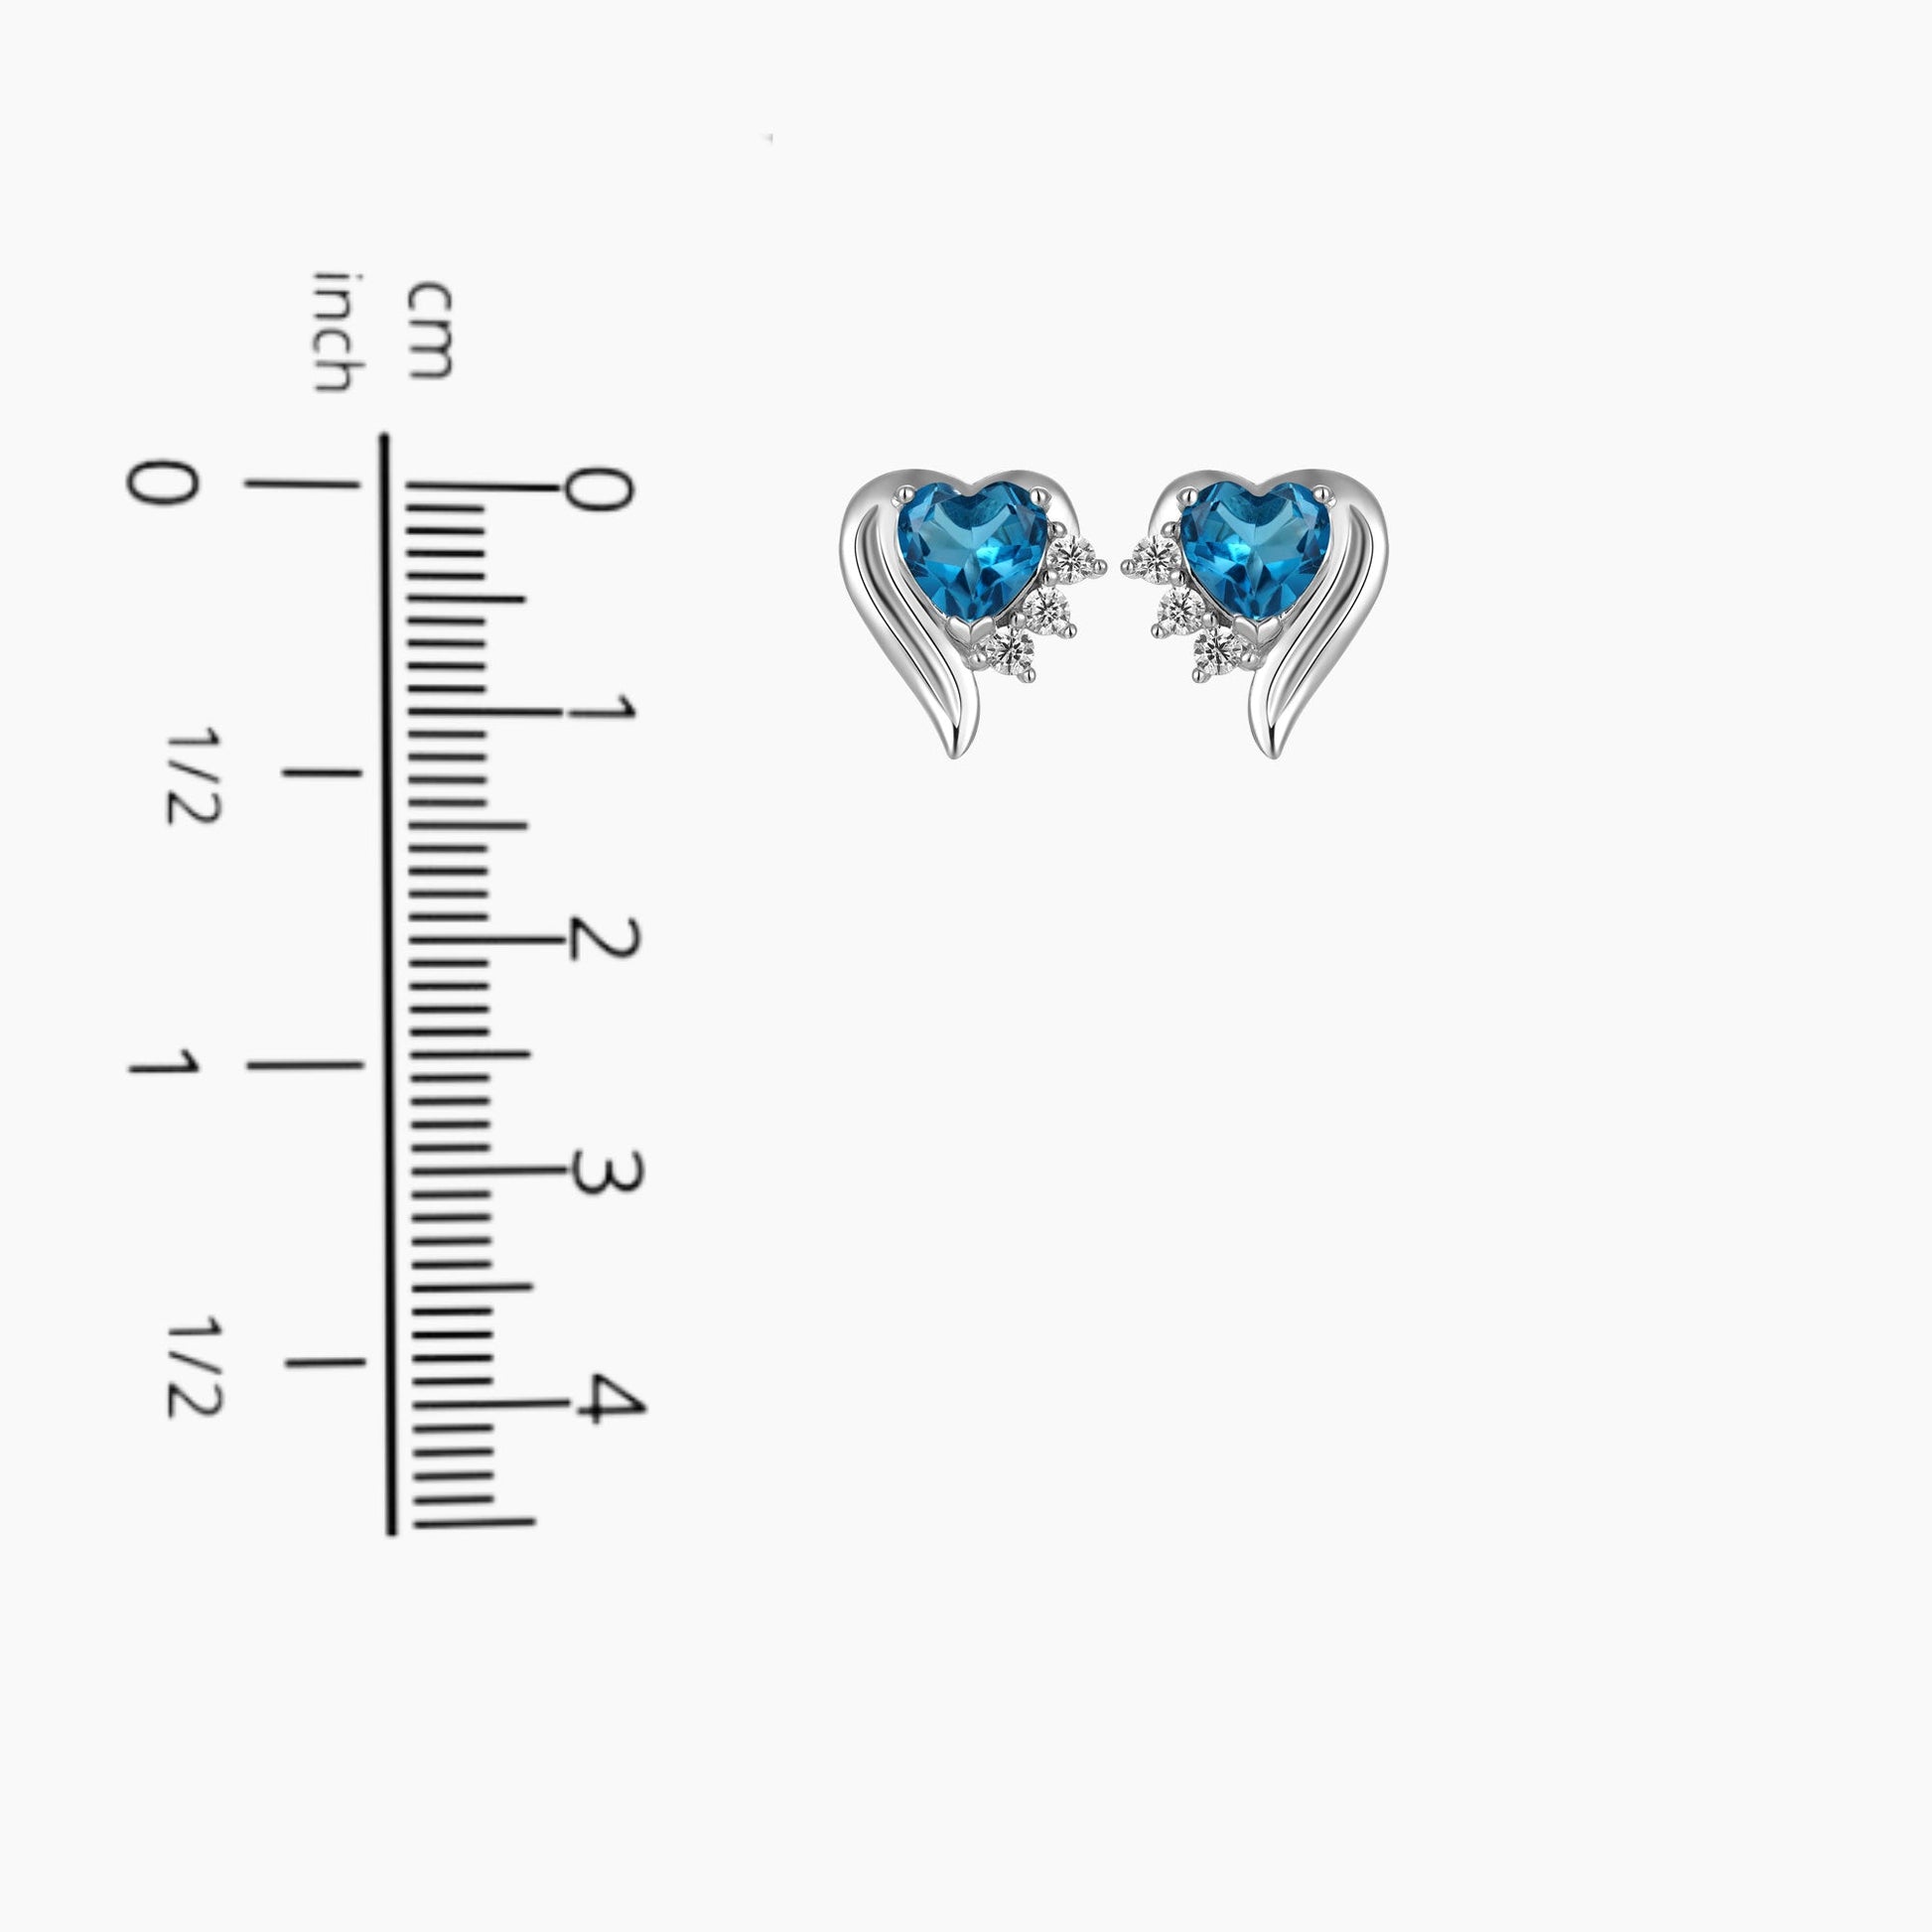 "London Blue Topaz Heart-Shaped Stud Earrings with Zirconia displayed next to a scale for size comparison